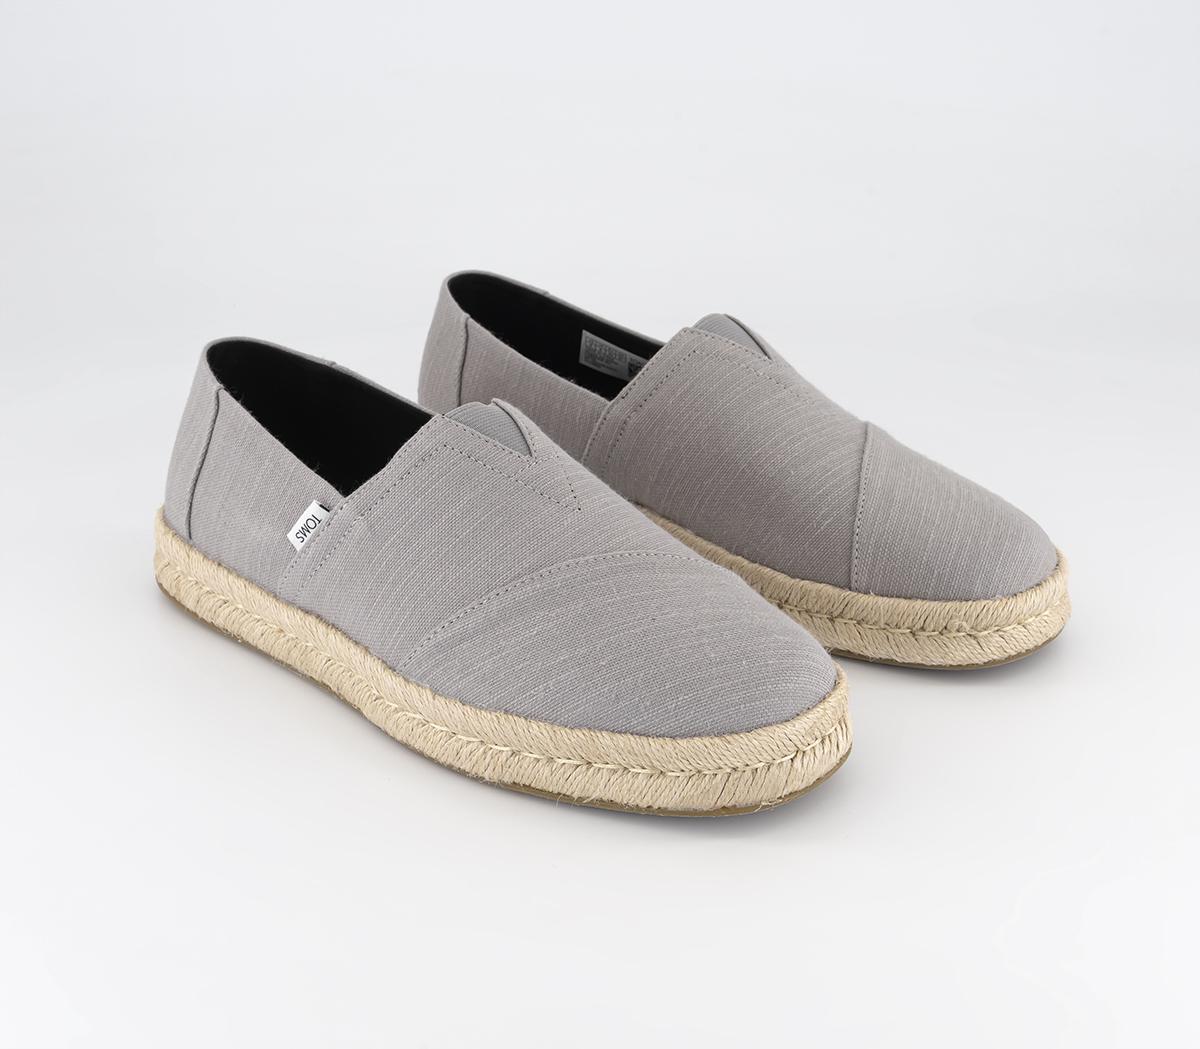 TOMS Mens Alpargata Rope 2.0 Slip Ons Drizzle Grey Recycled Cotton Slubby Woven, 7